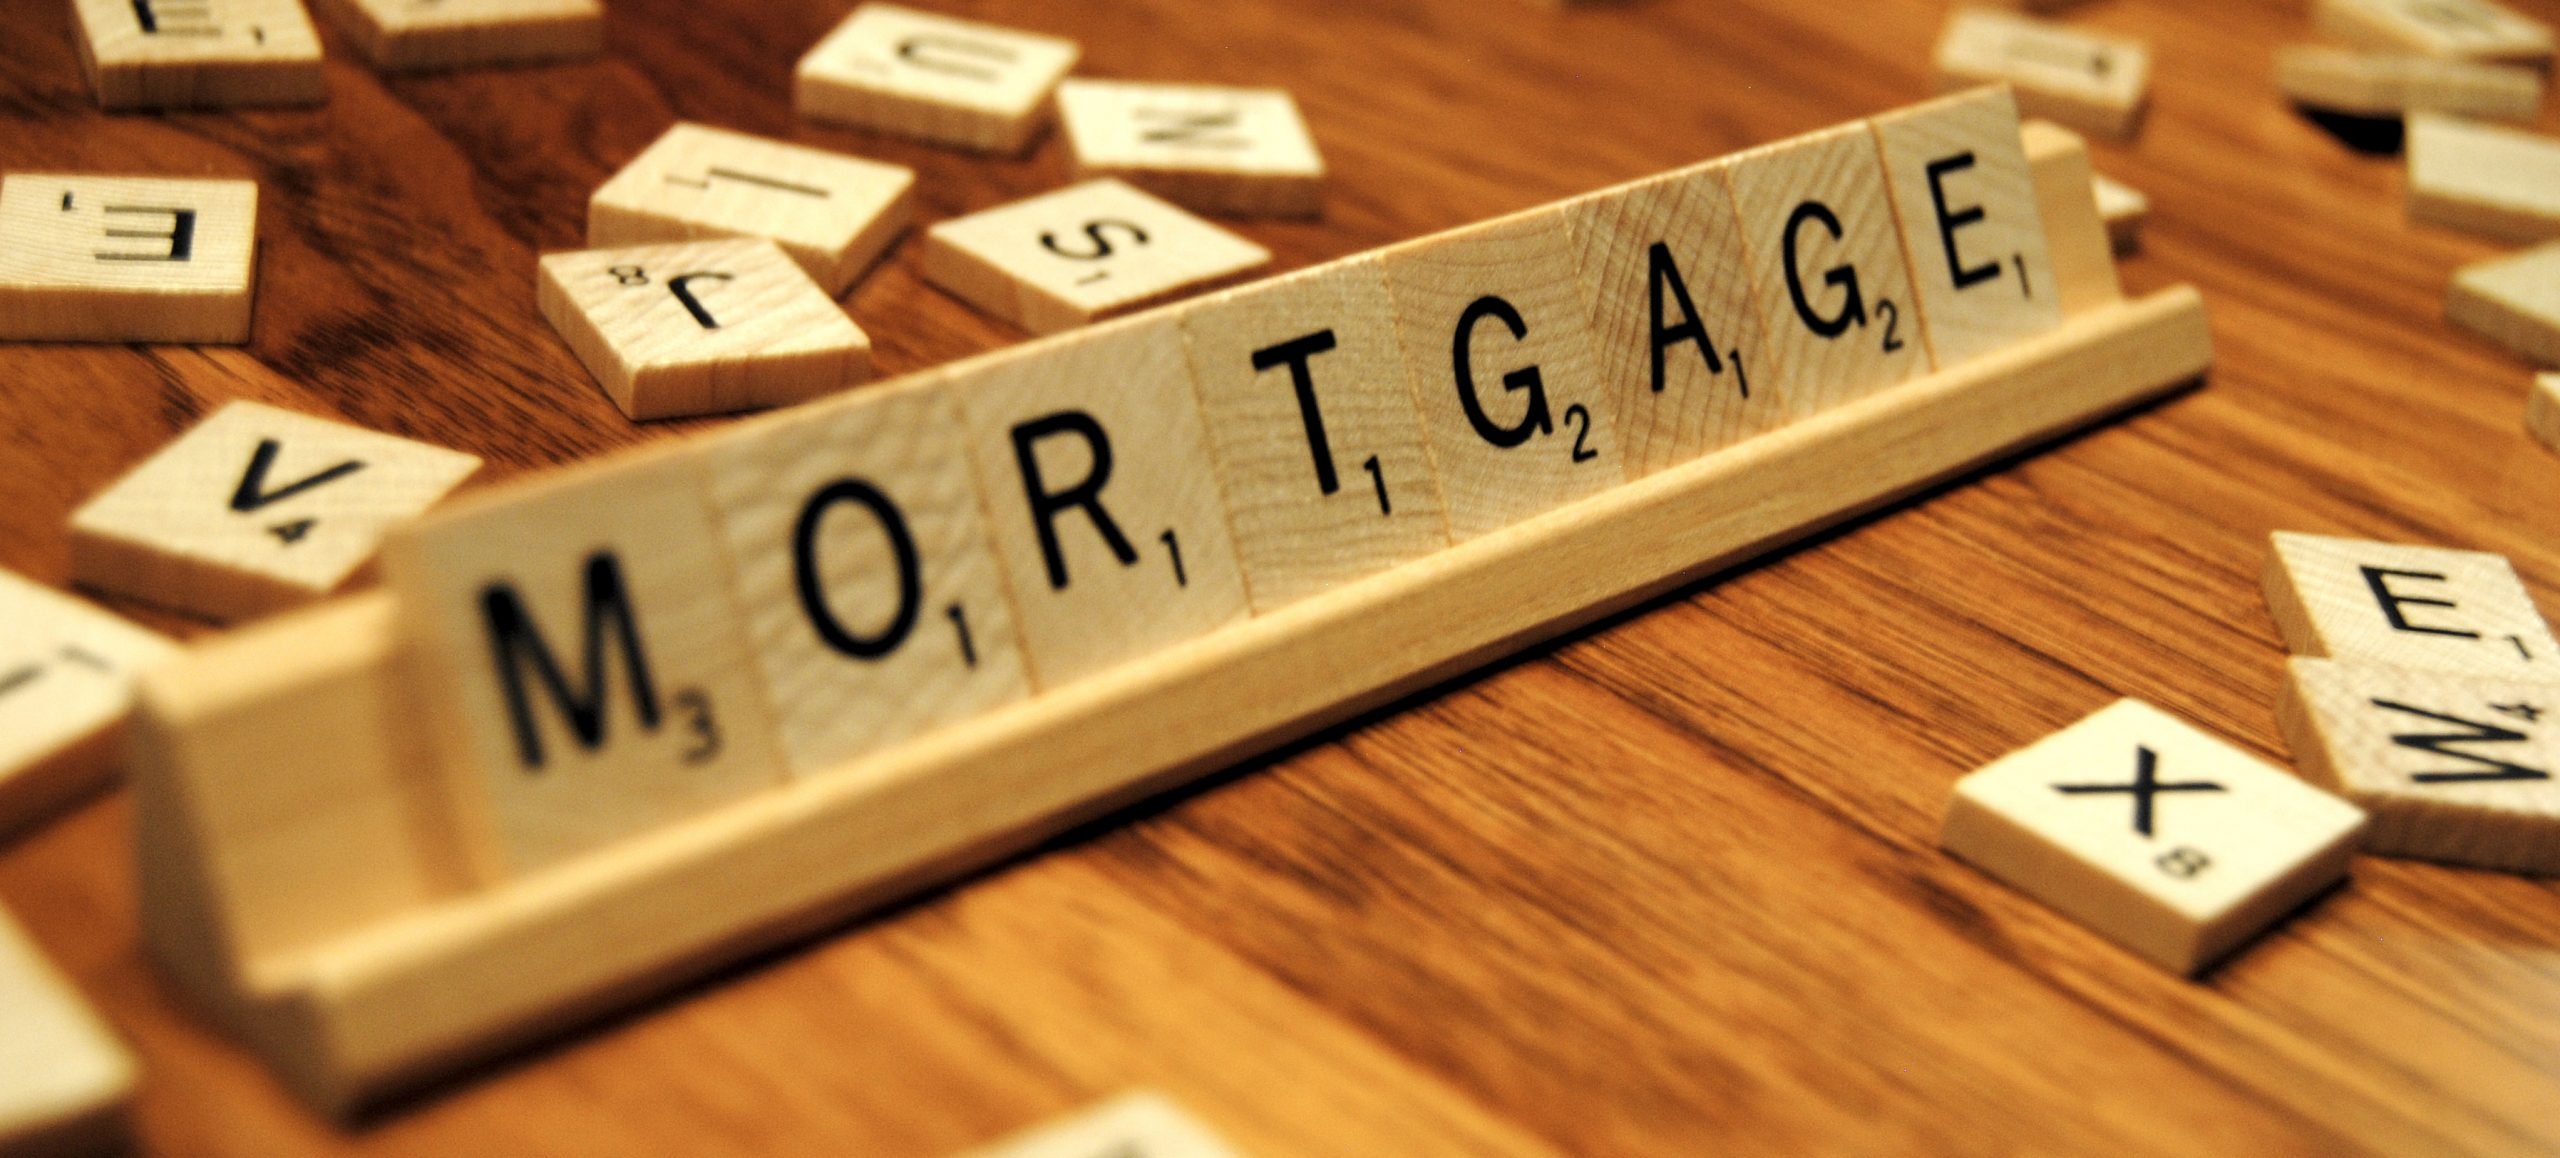 poshcreationsanddesigns: Can I Qualify For Two Mortgages